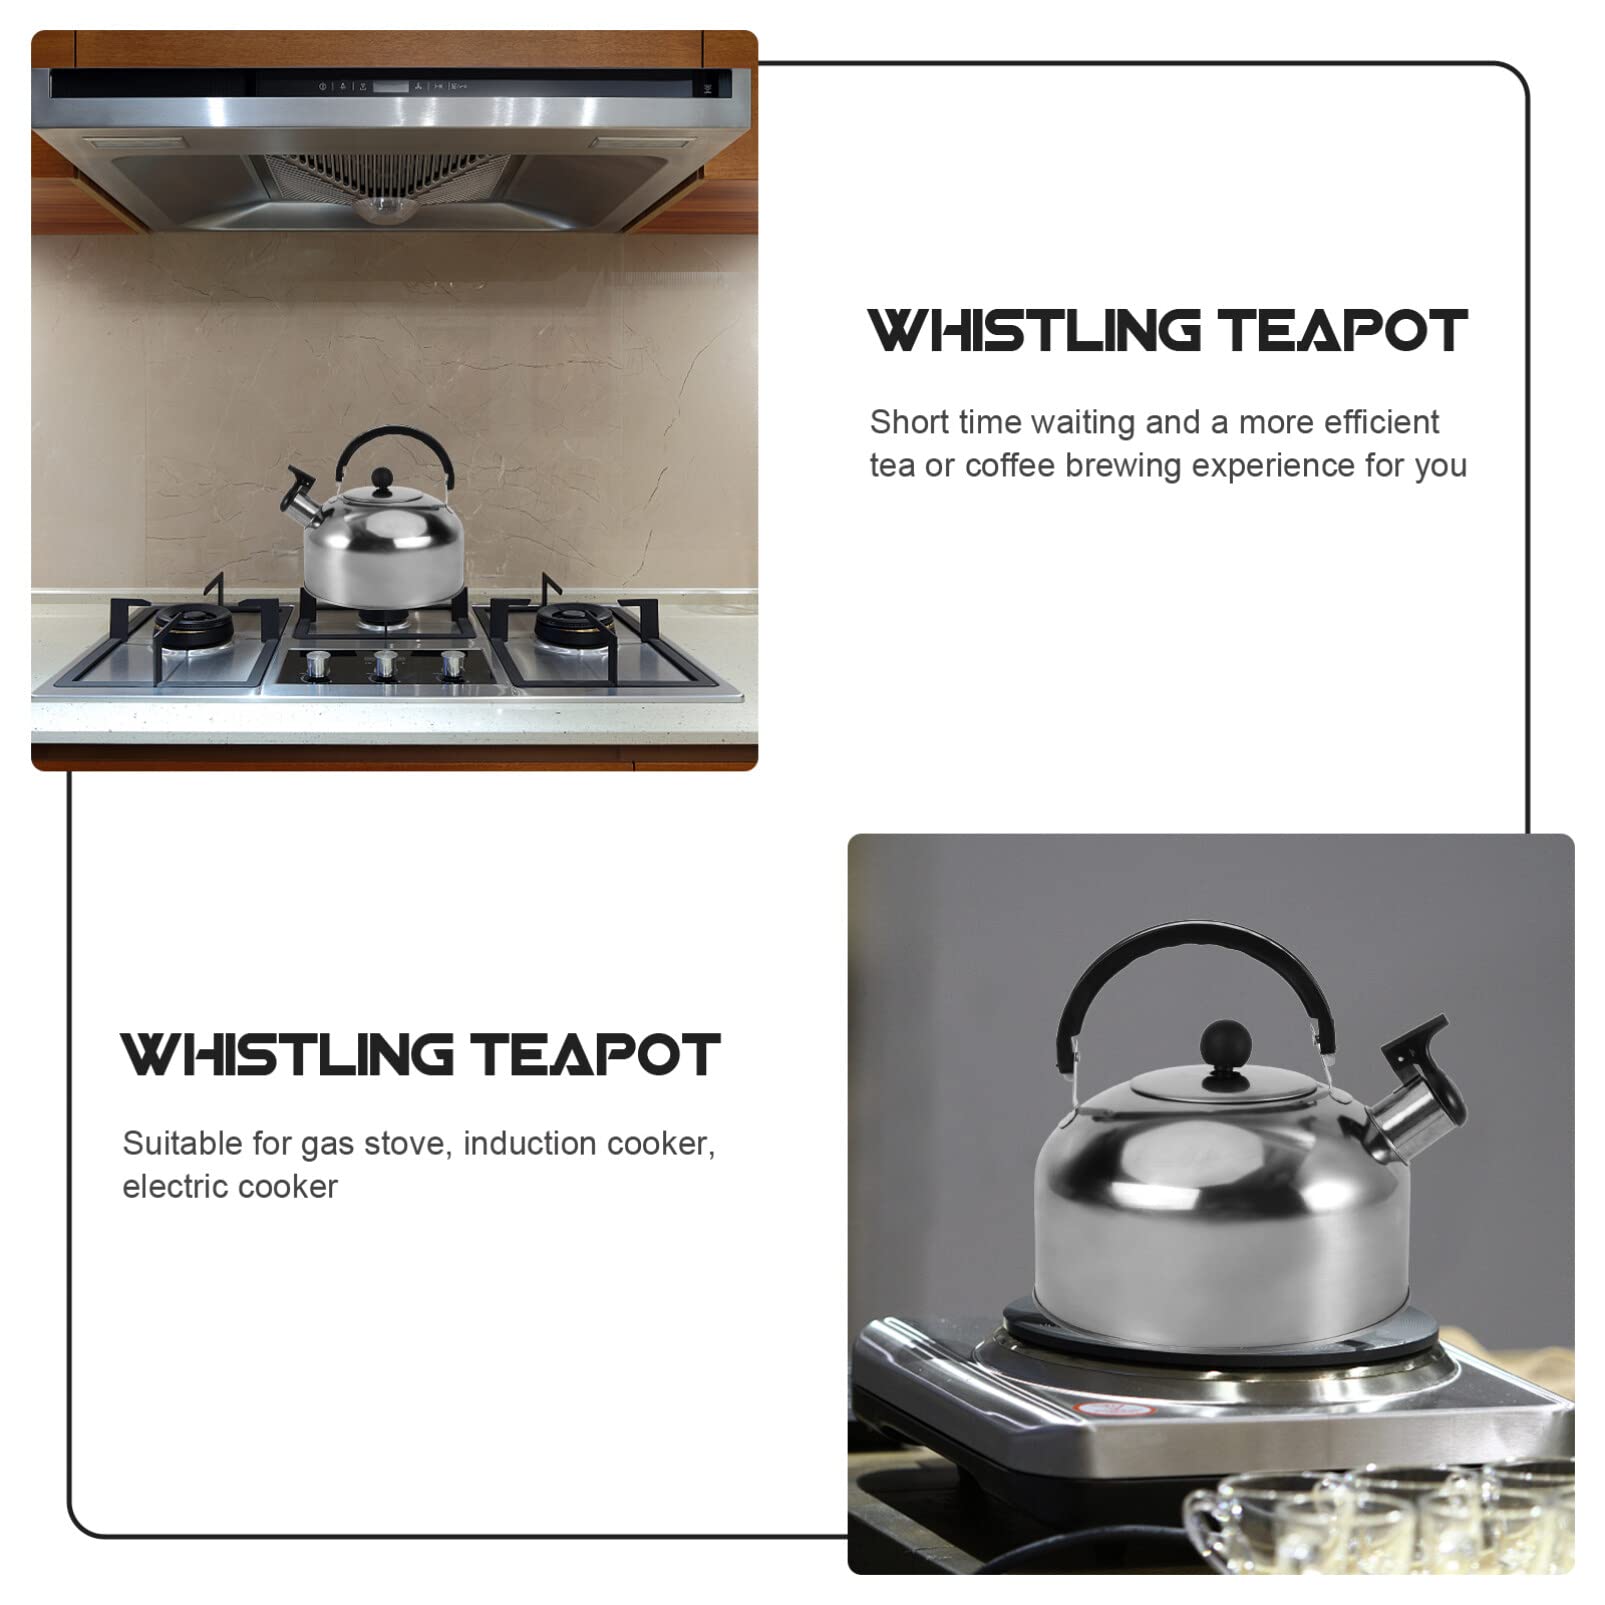 Housoutil 1PC Stainless Steel Whistling Tea Kettles, Silver Water Boil Kettle, 2L/1.81Quart Sounding Induction Cooker Flat Bottom Kettle for Coffee, Tea, Milk (Electric Applicable)